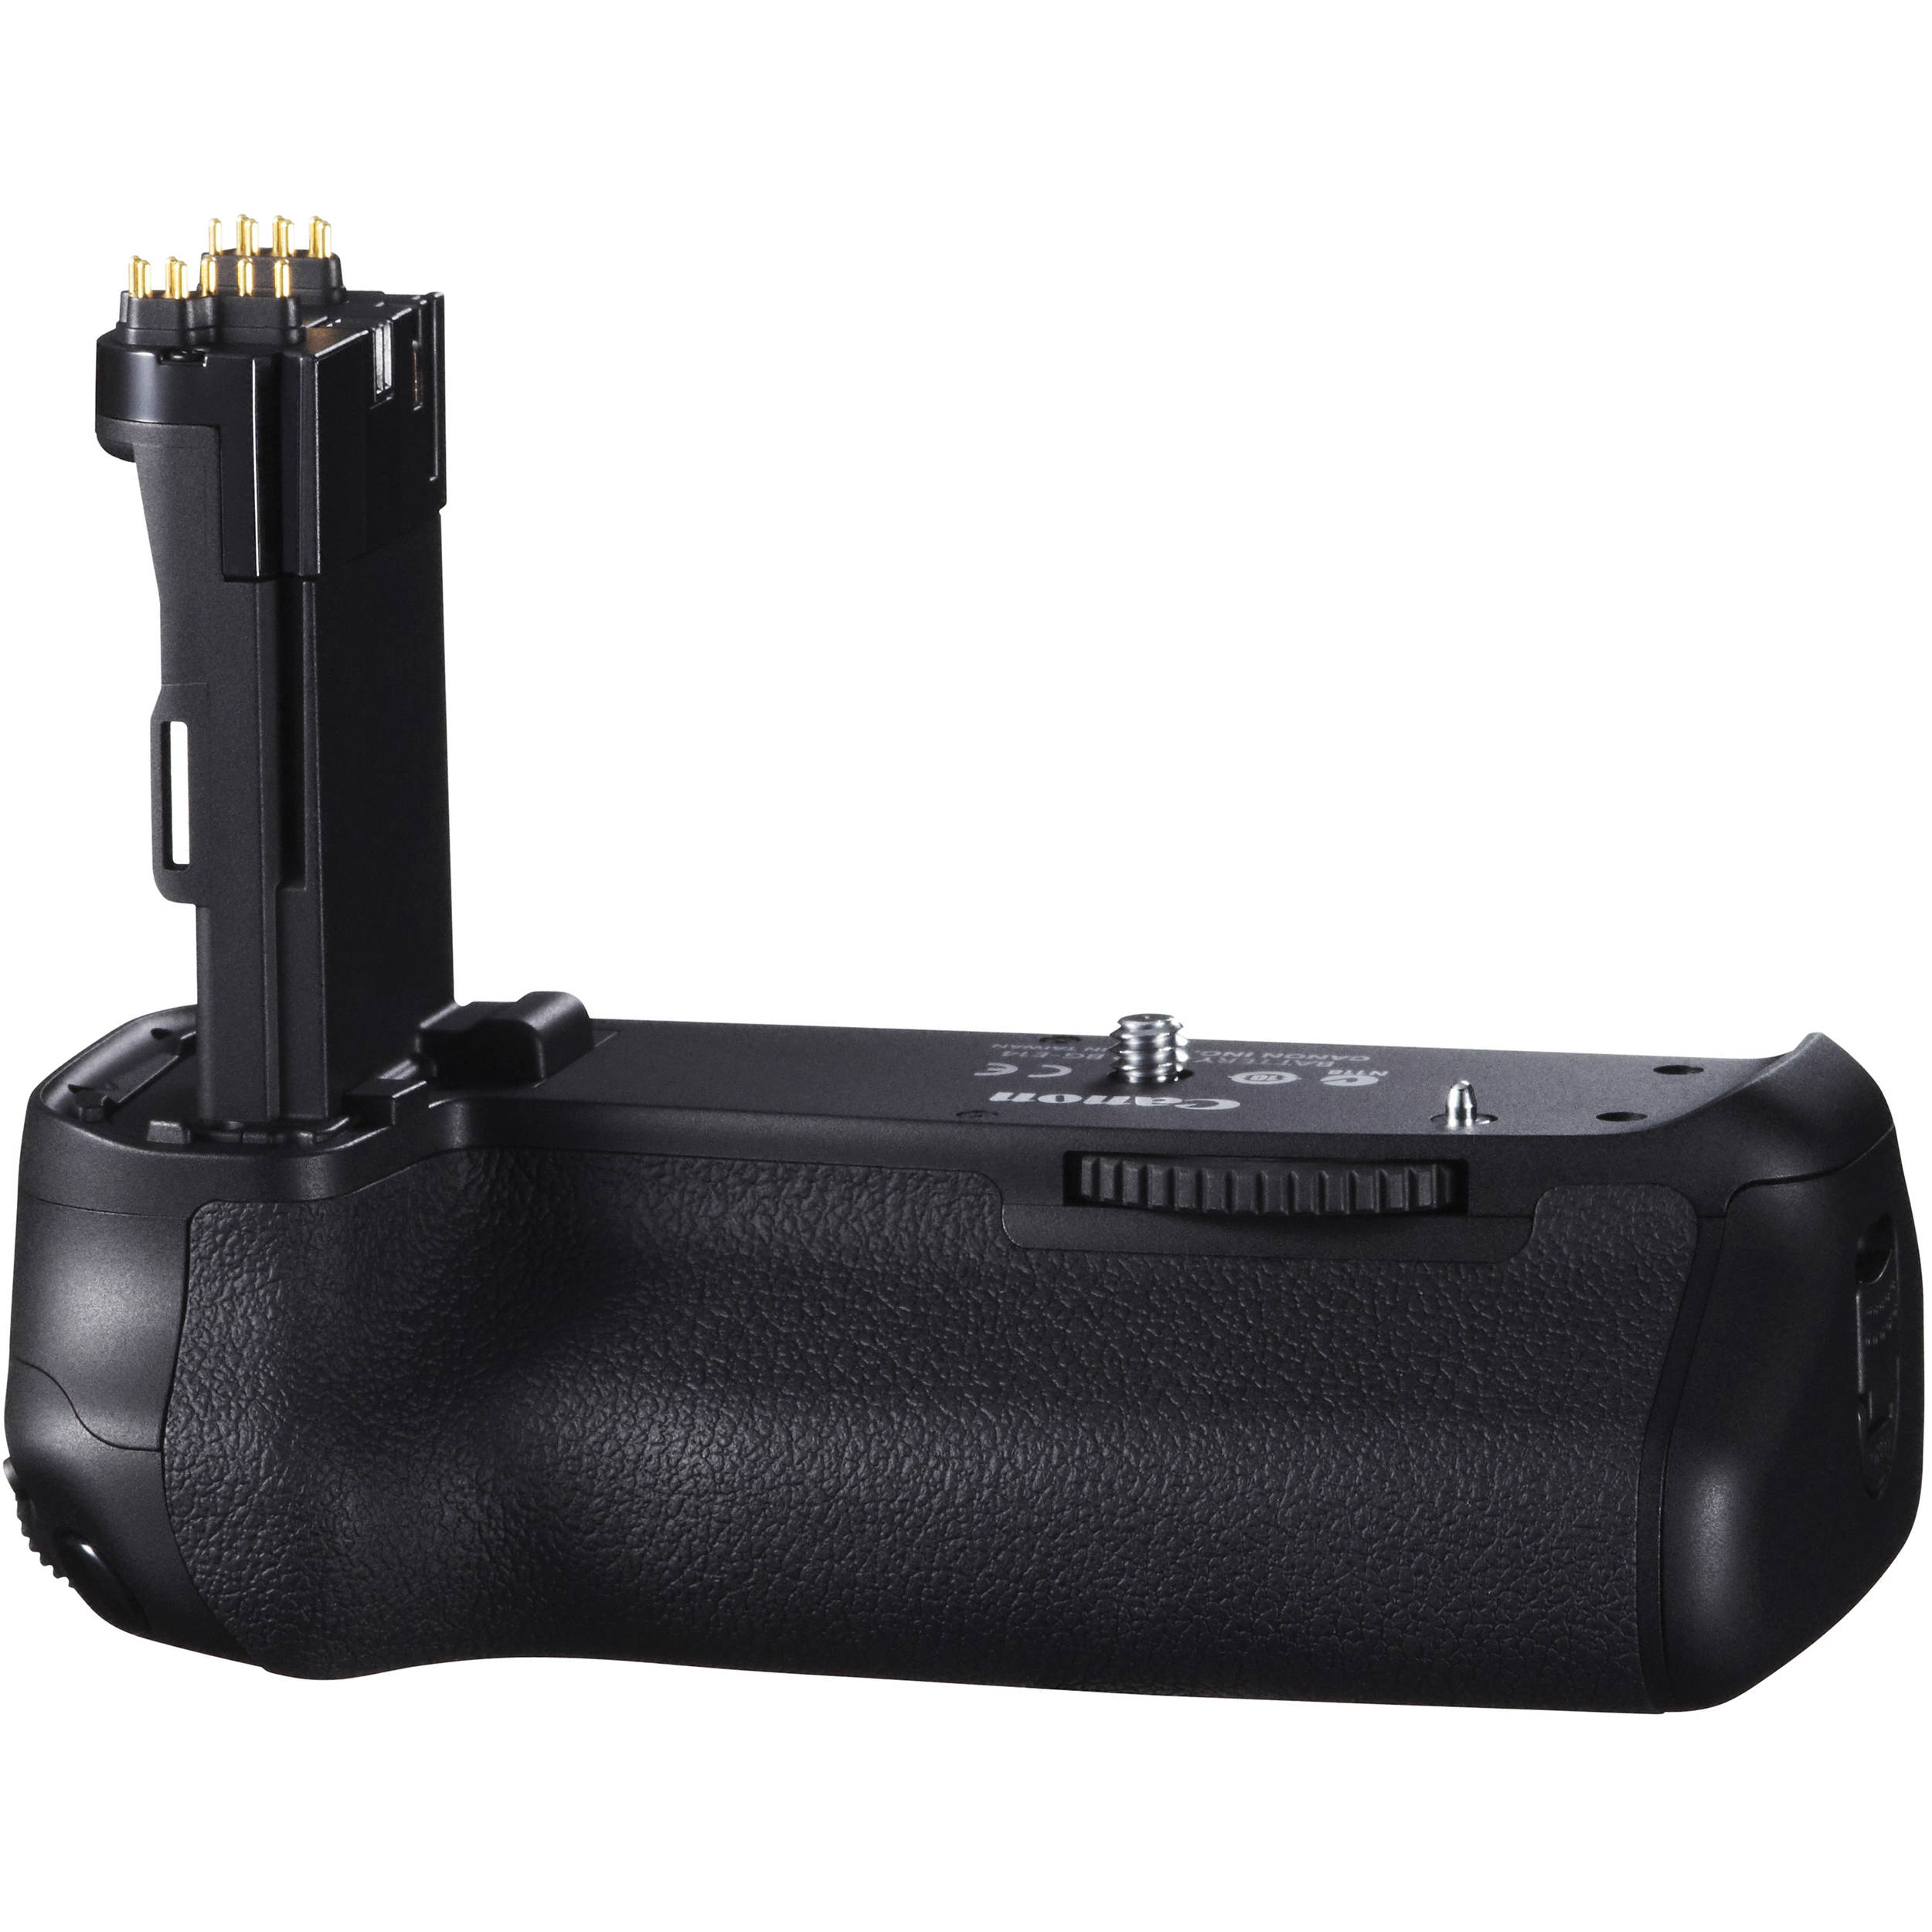 Canon Battery Grip Compatibility Chart